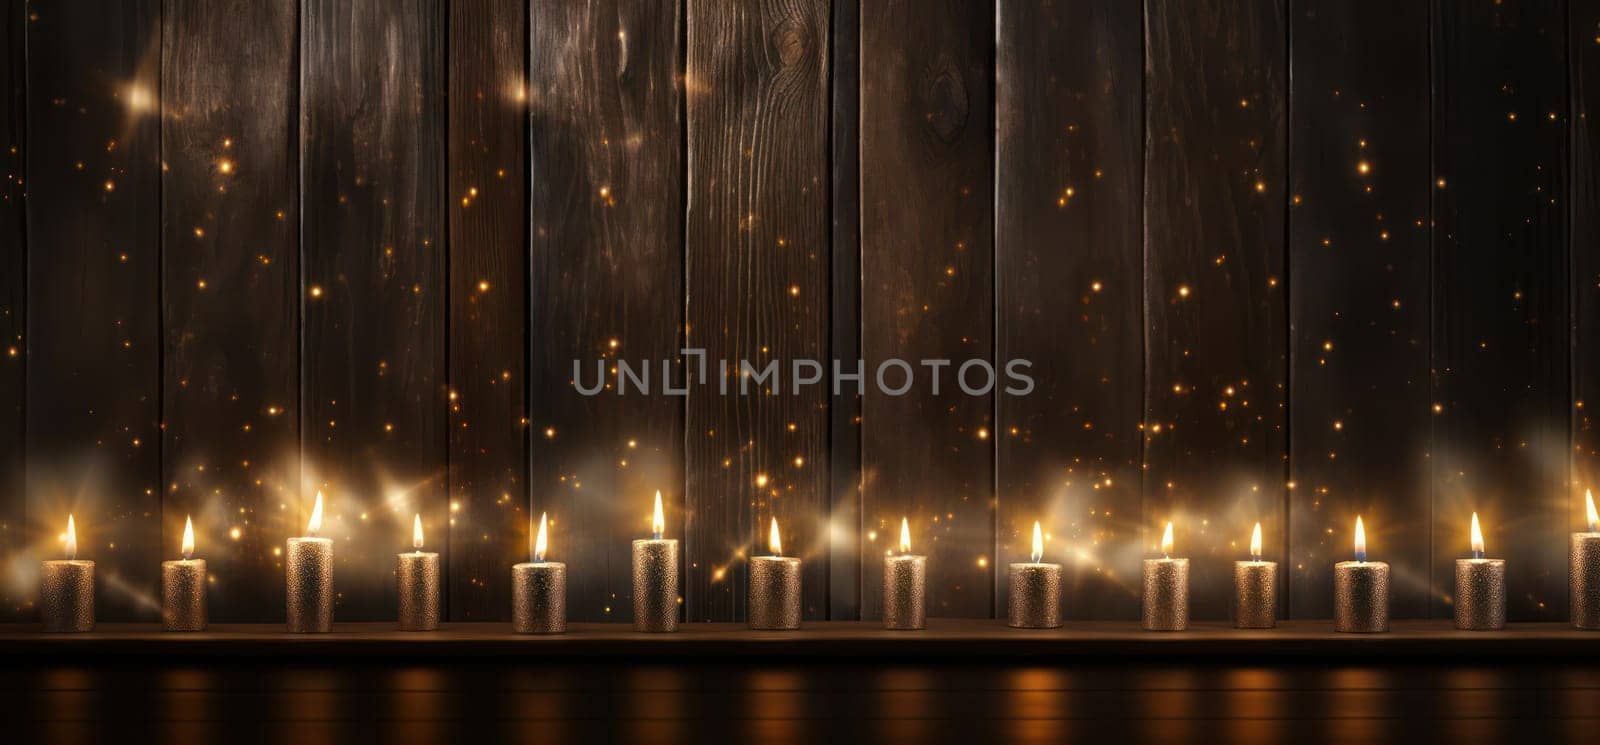 Rustic Christmas Celebration: Dark Wooden Table with Festive Lights and Vintage Decoration